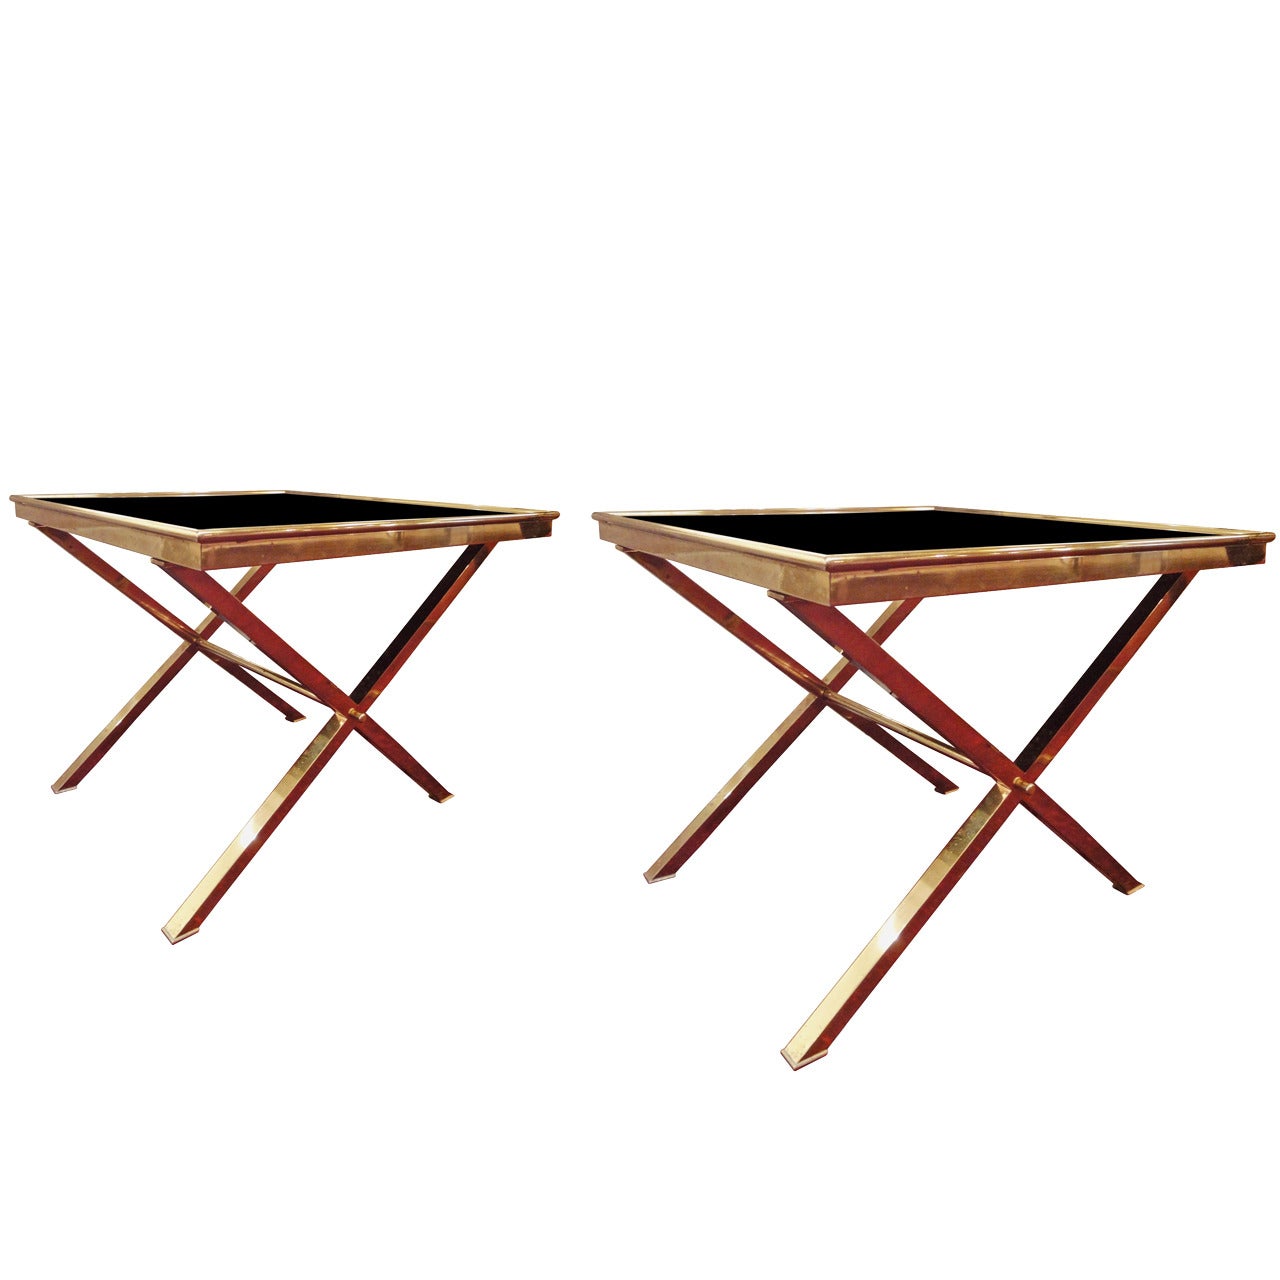 A Pair of Occasional Tables by Maison Jansen